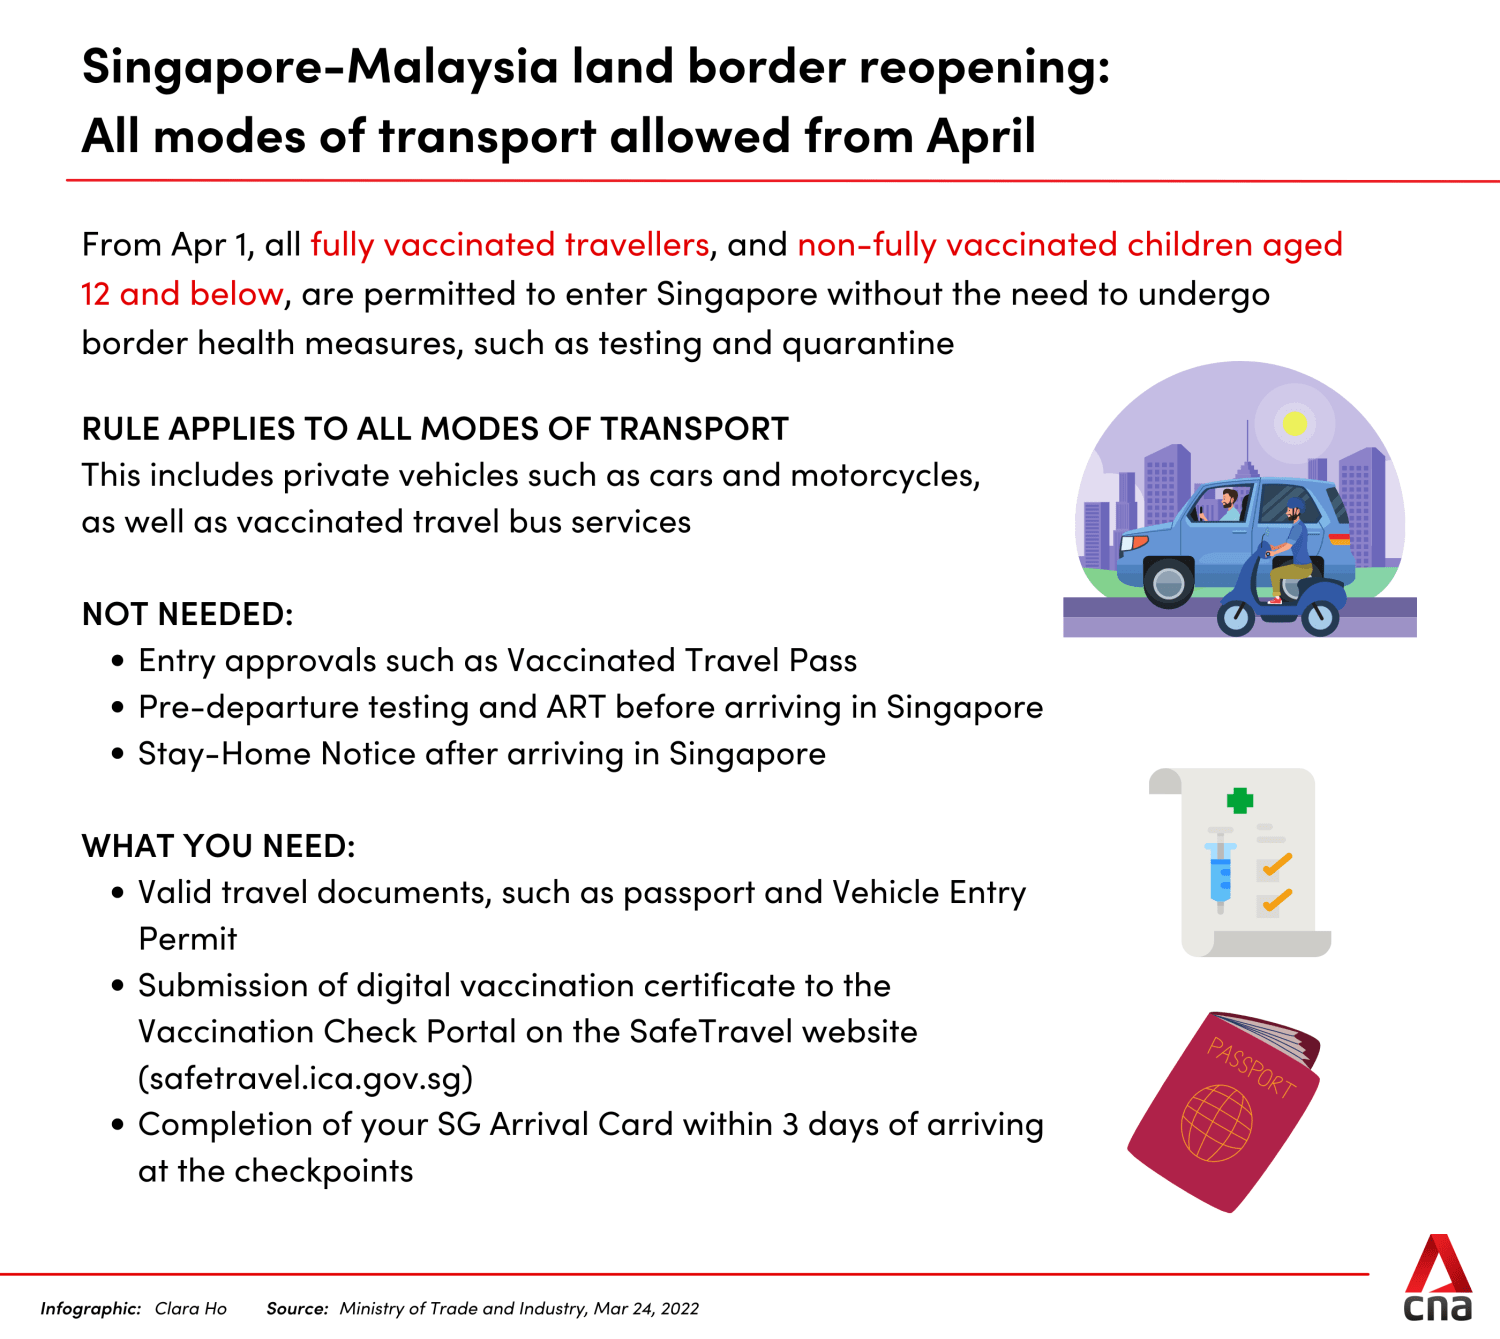 Can foreigners enter malaysia now